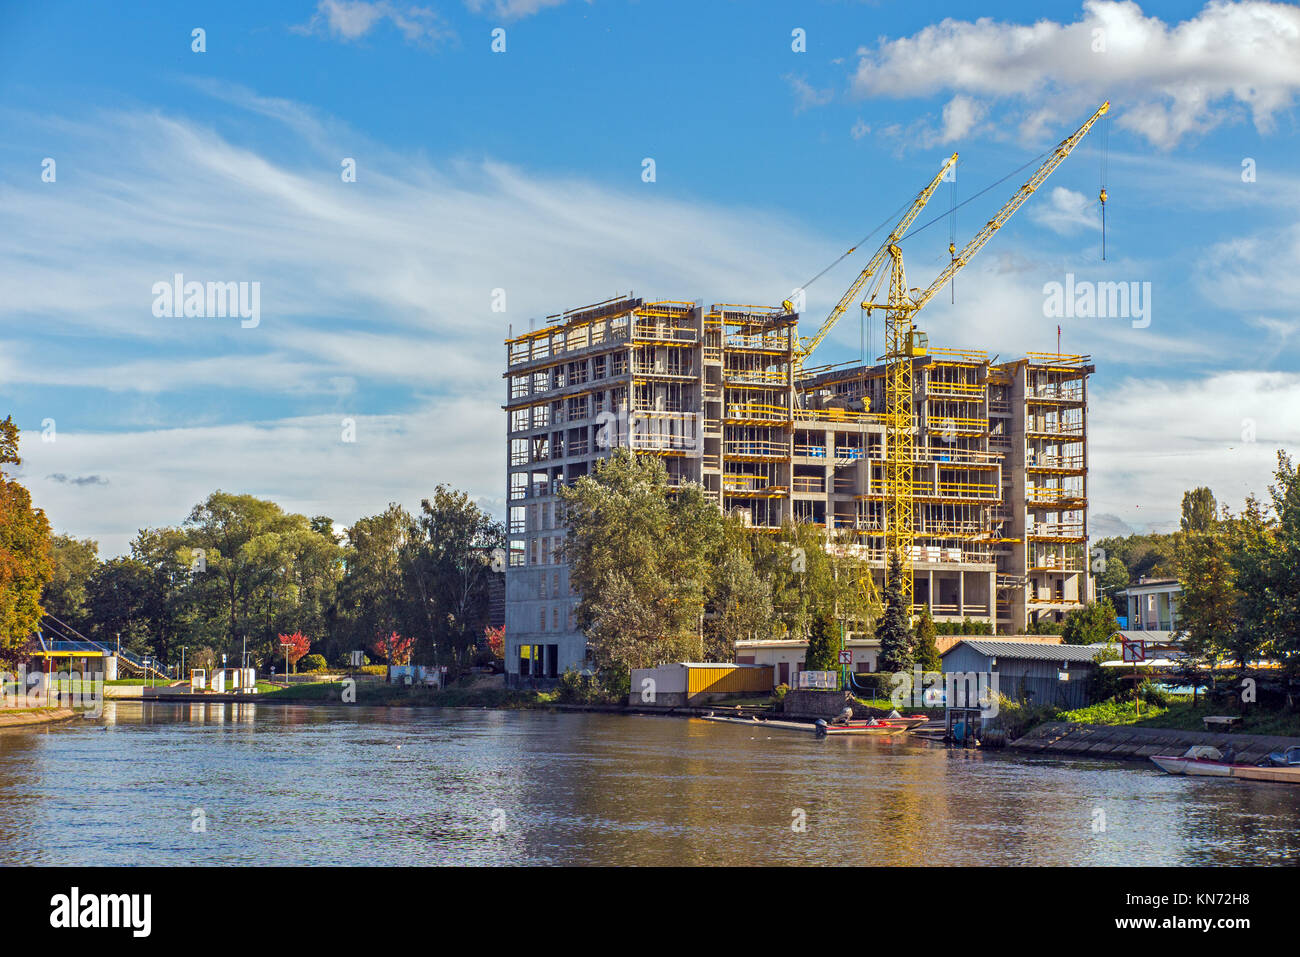 Building new homes on the banks of the river Brda in the Polish city of Bydgoszcz Poland using a large yellow crane Stock Photo